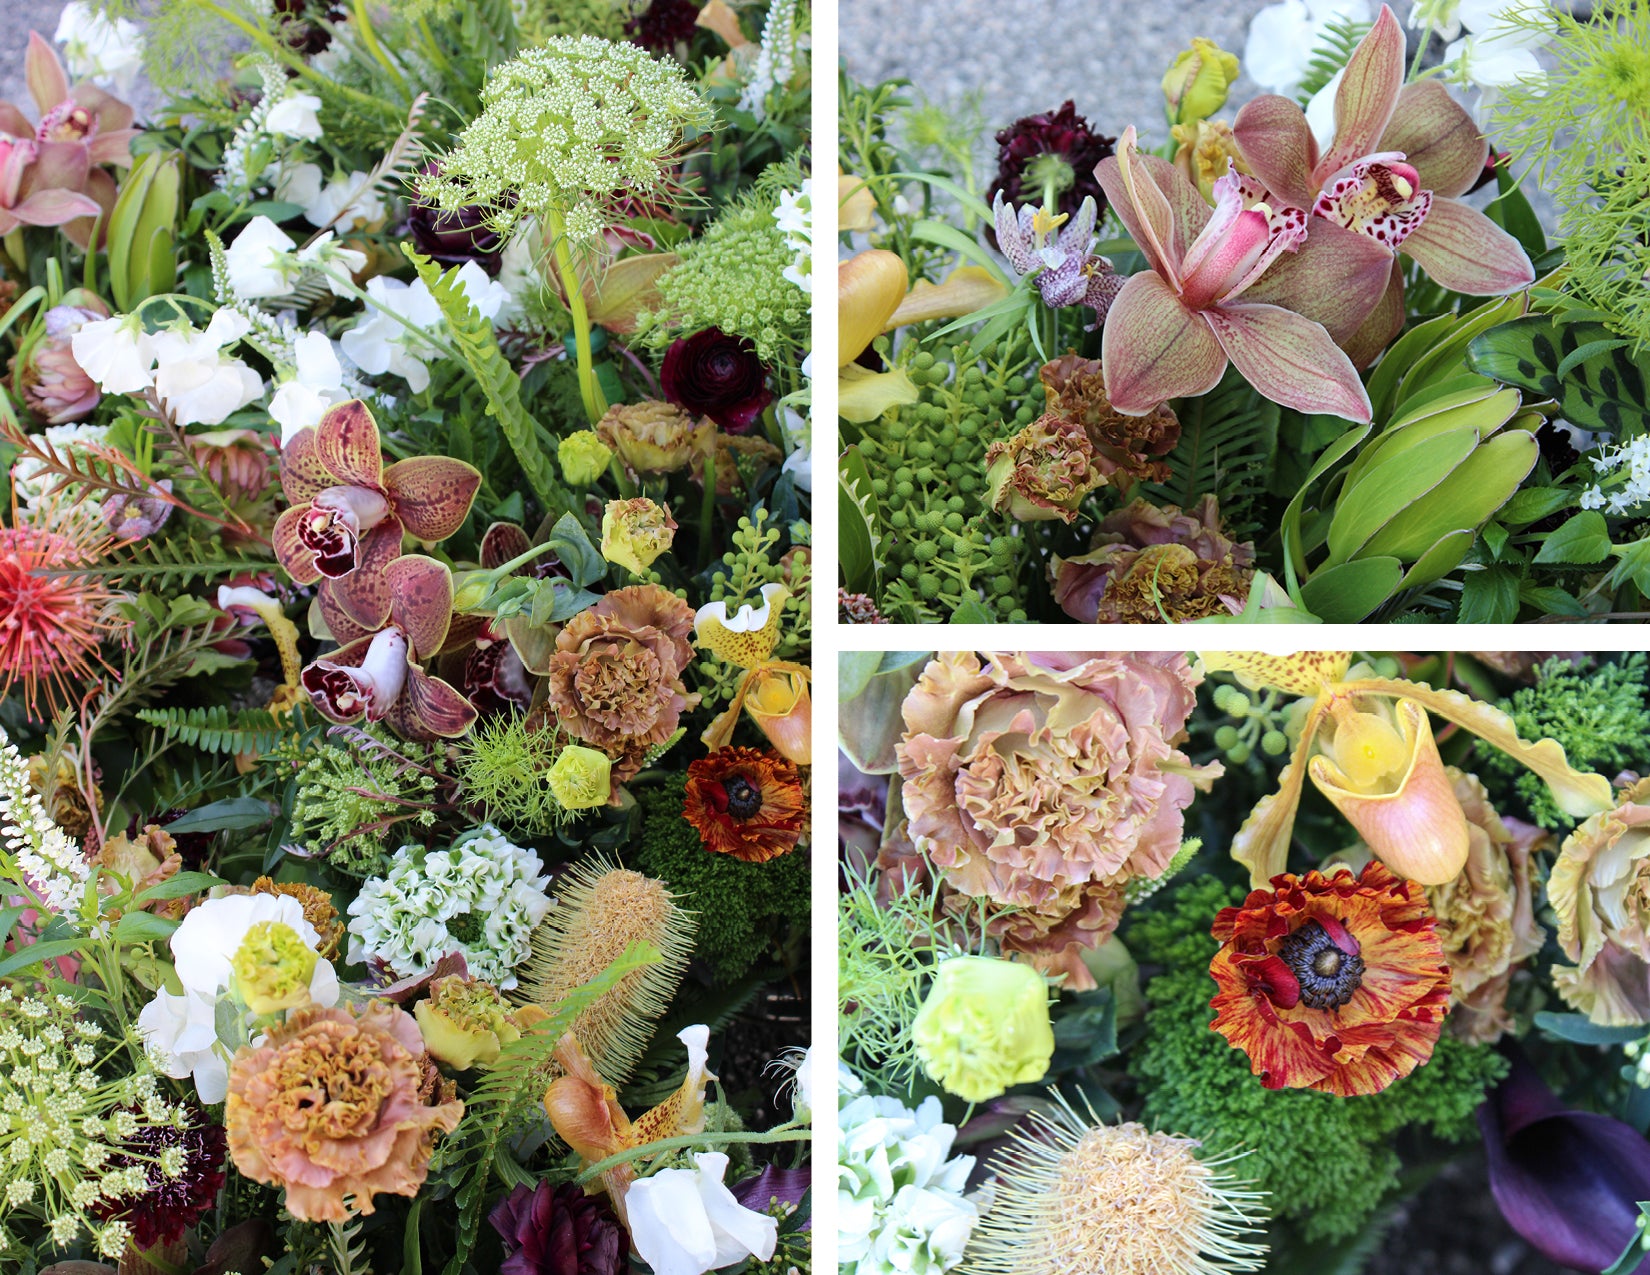 wildflora forest floor event flowers lush woodland orchid pincushion protea ranunculus green verde yellow red purple violet mauve white queen anne's lace pitcher plant sweet pea peacock foliage leaf fern fairytale faerie wedding